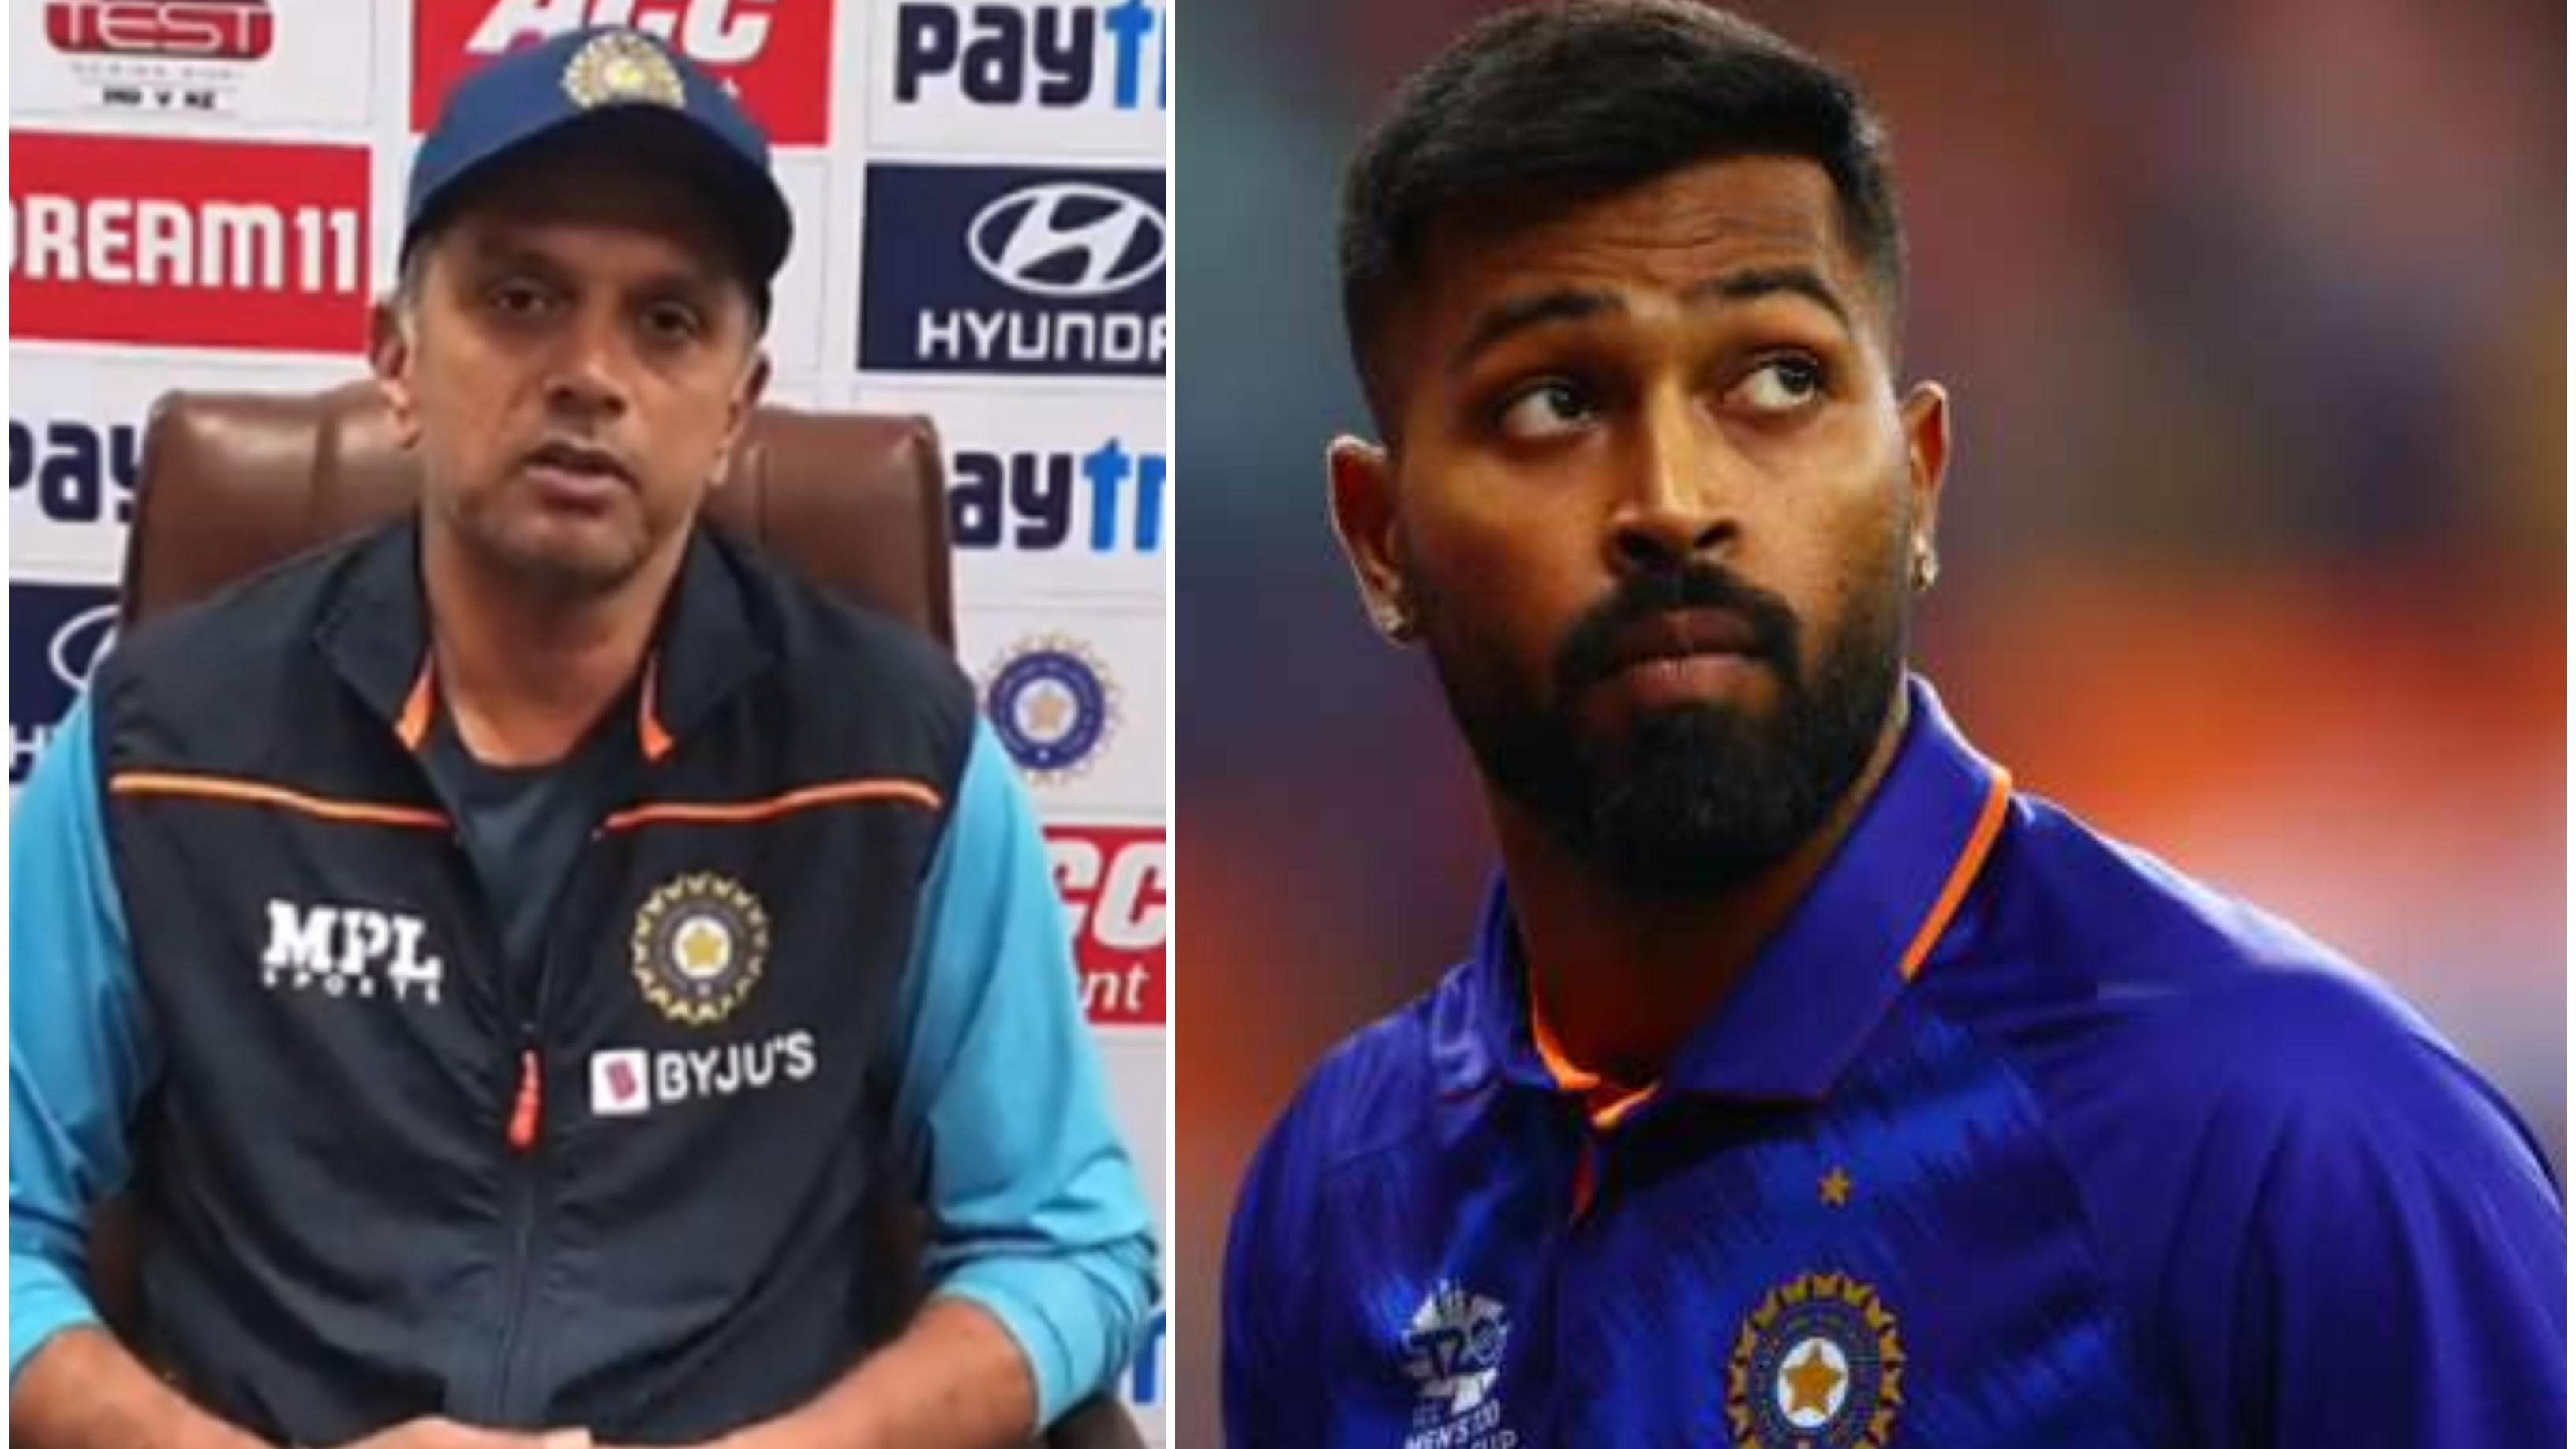 IND v SA 2022: Dravid praises Pandya’s captaincy in IPL, expects him to benefit Team India with his bowling